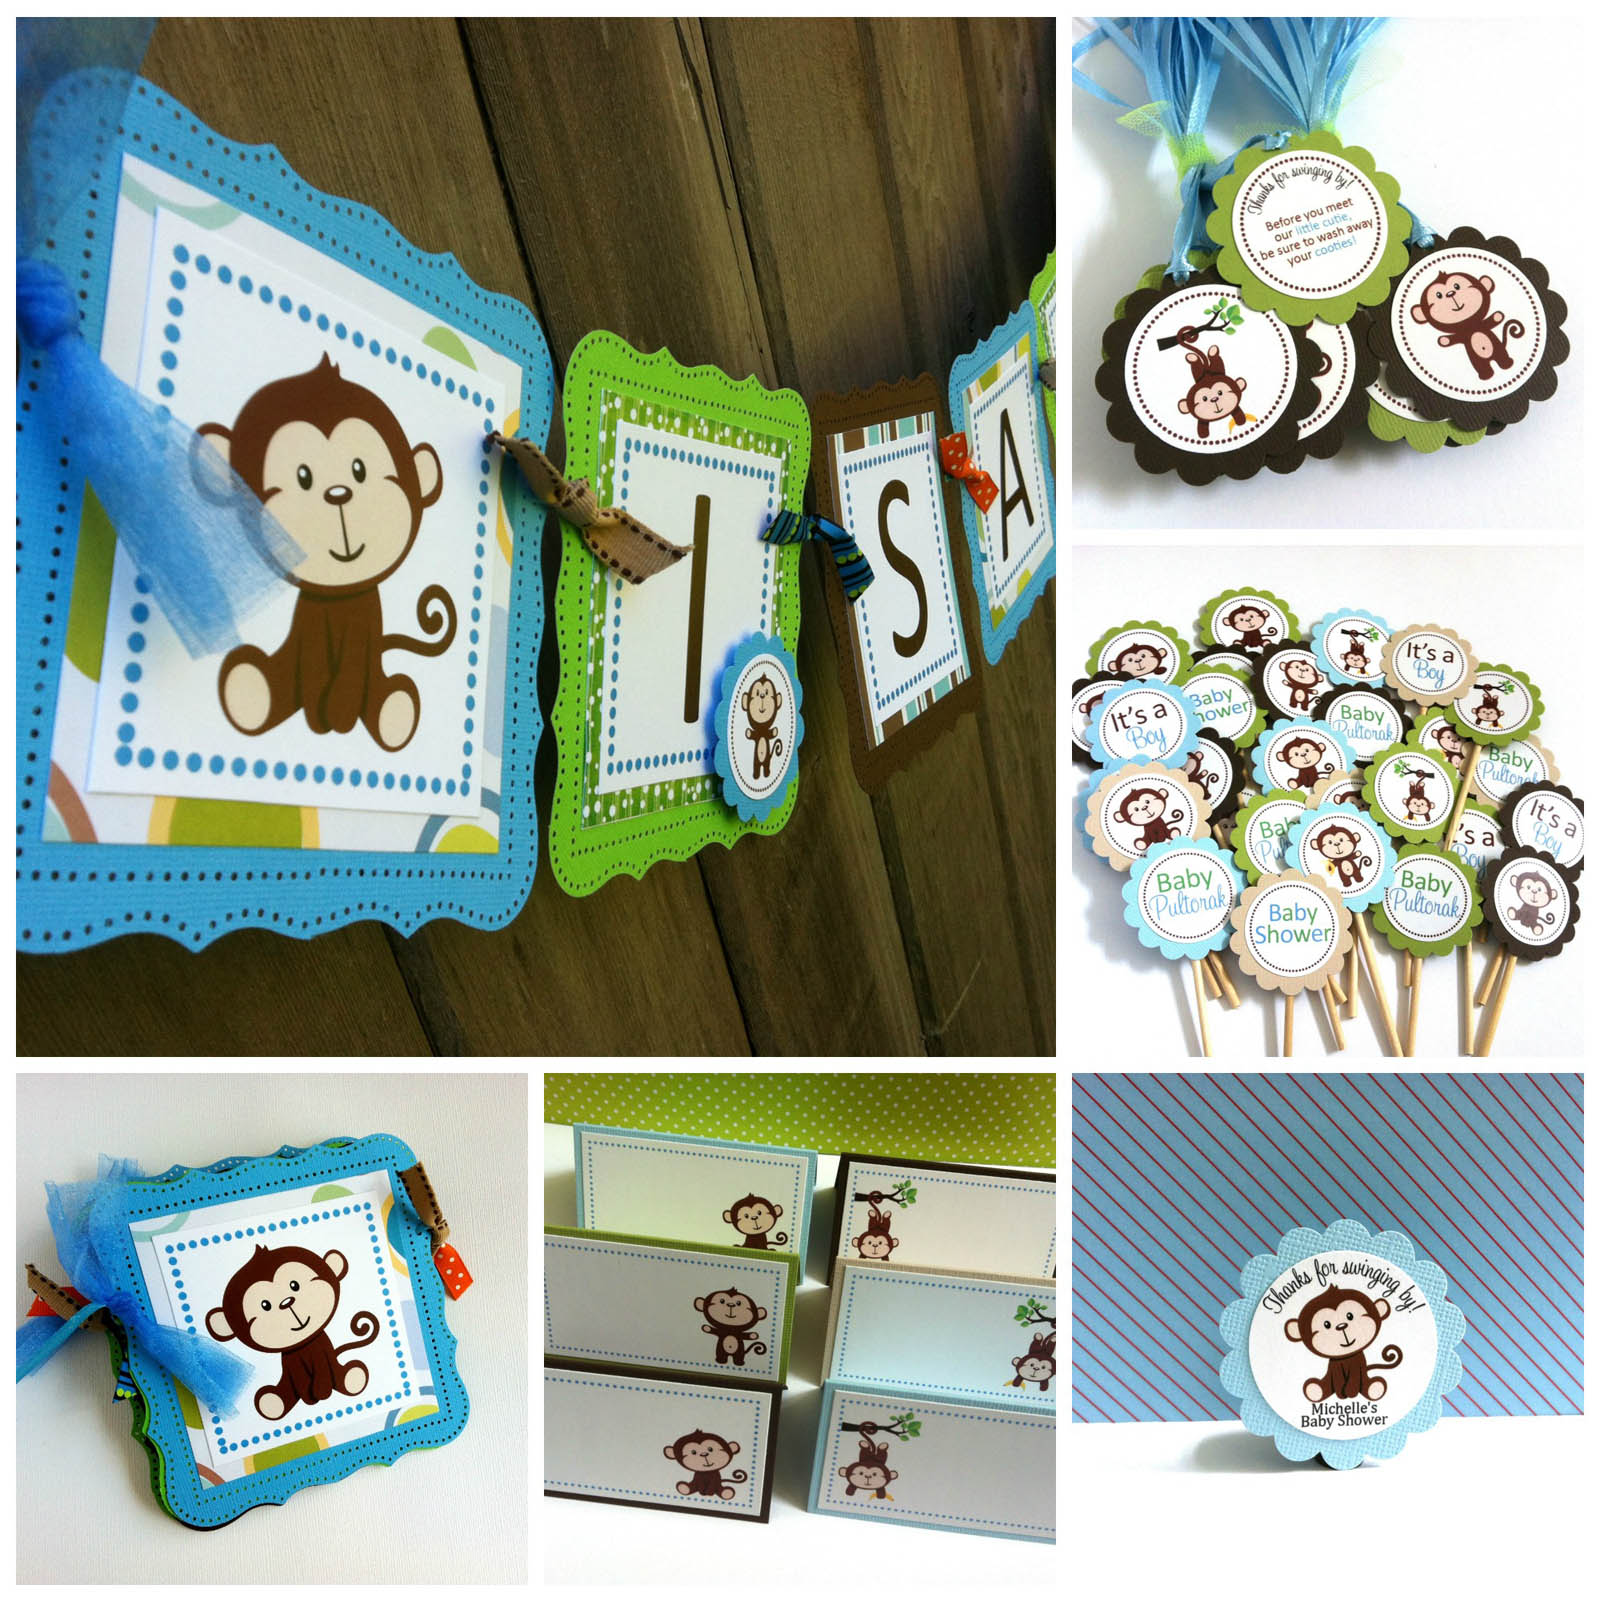 https://adorebynat.com/wp-content/uploads/2016/03/Monkey-Party-Decorations-by-Adore-By-Nat.jpg